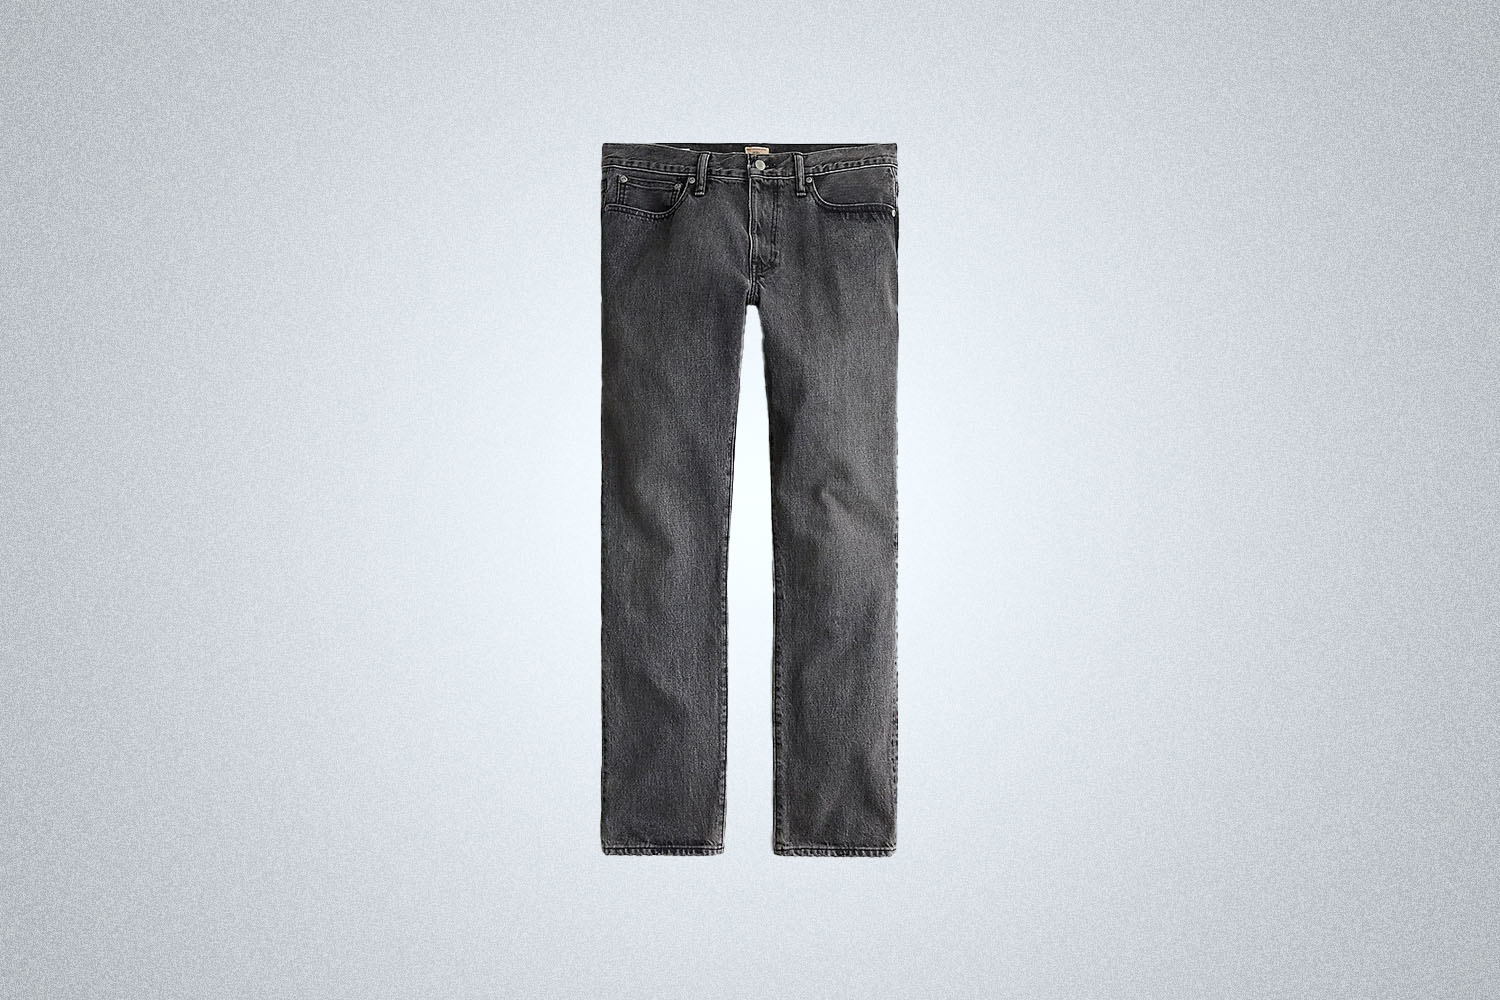 The J.Crew 770 Straight-fit jean in black wash on a gray background